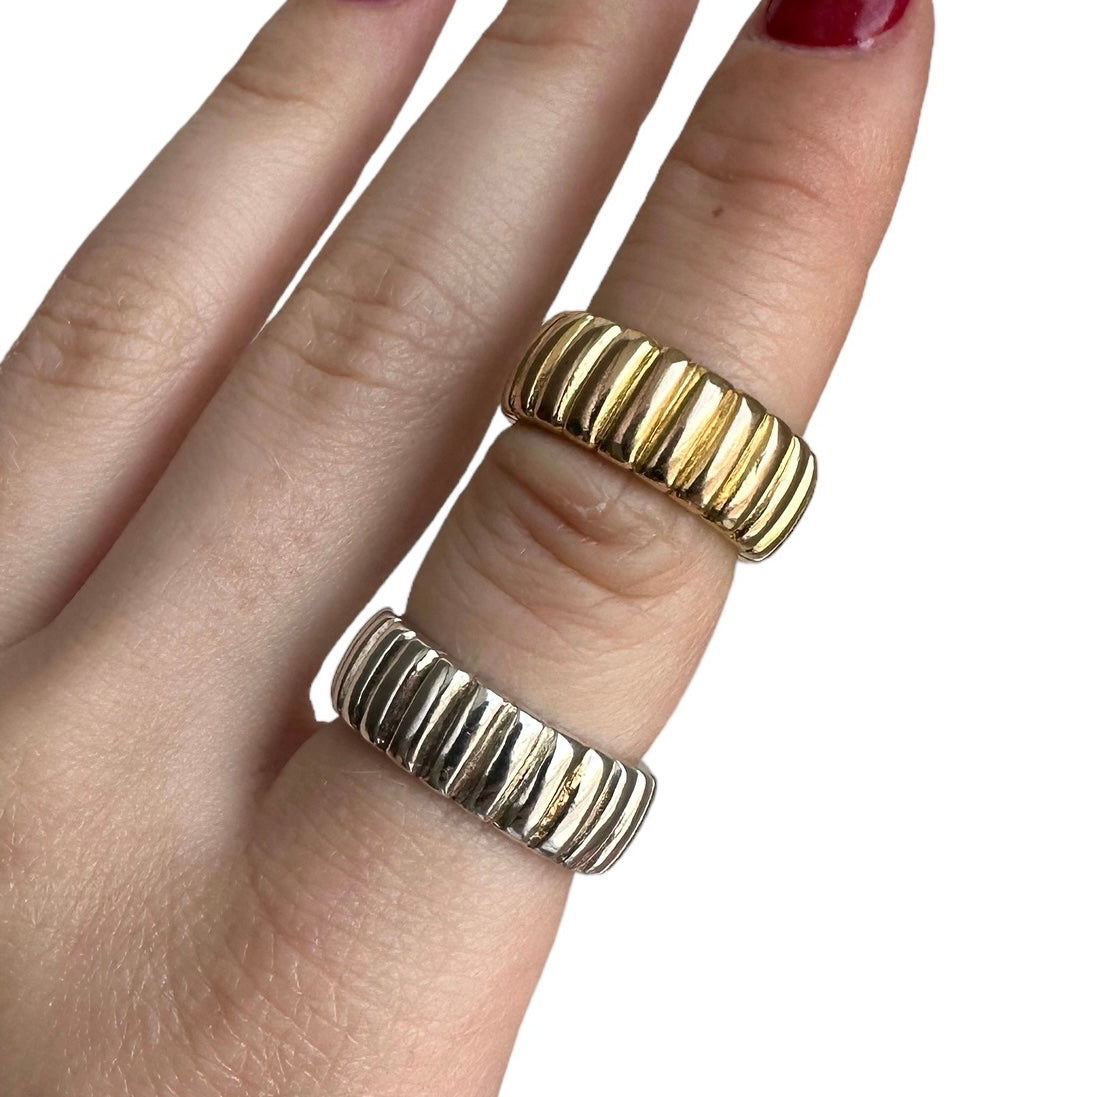 Grooved ring